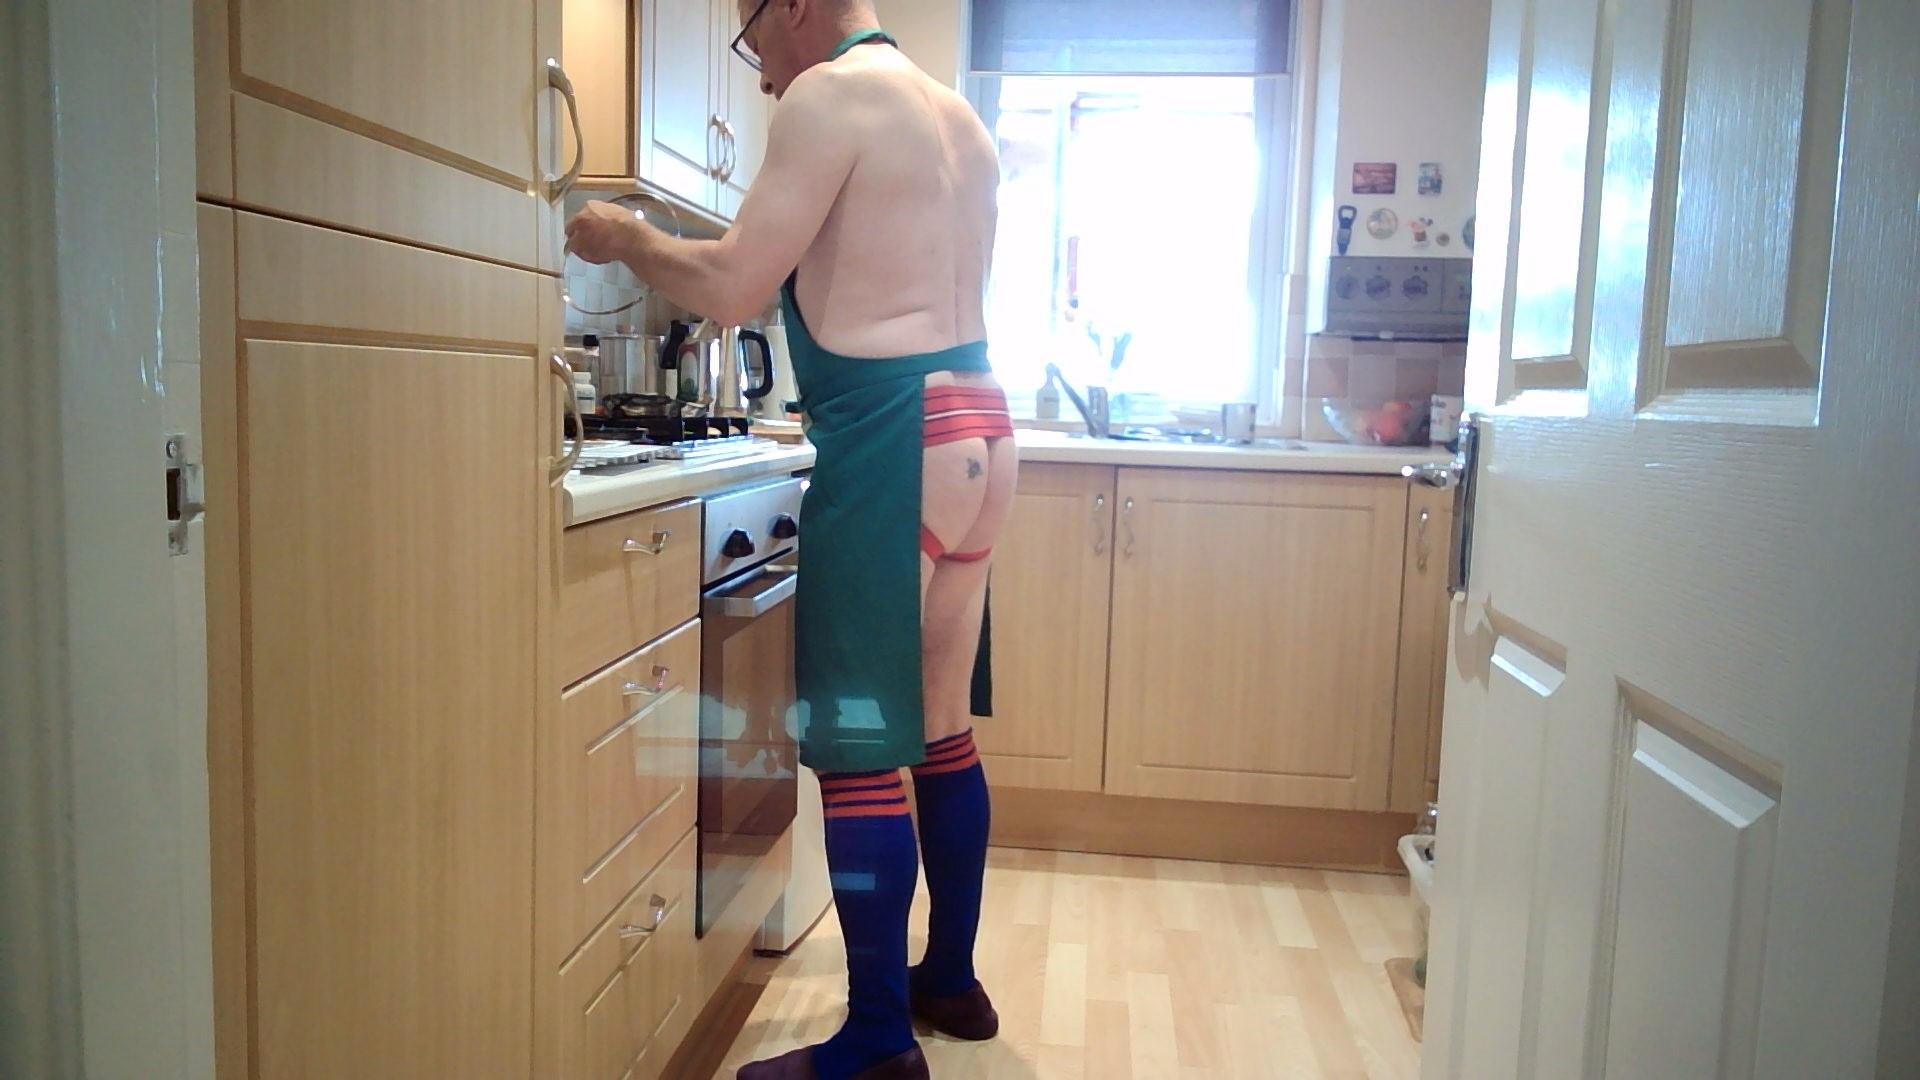 Cooking my meal in my new red Golberg jockstrap